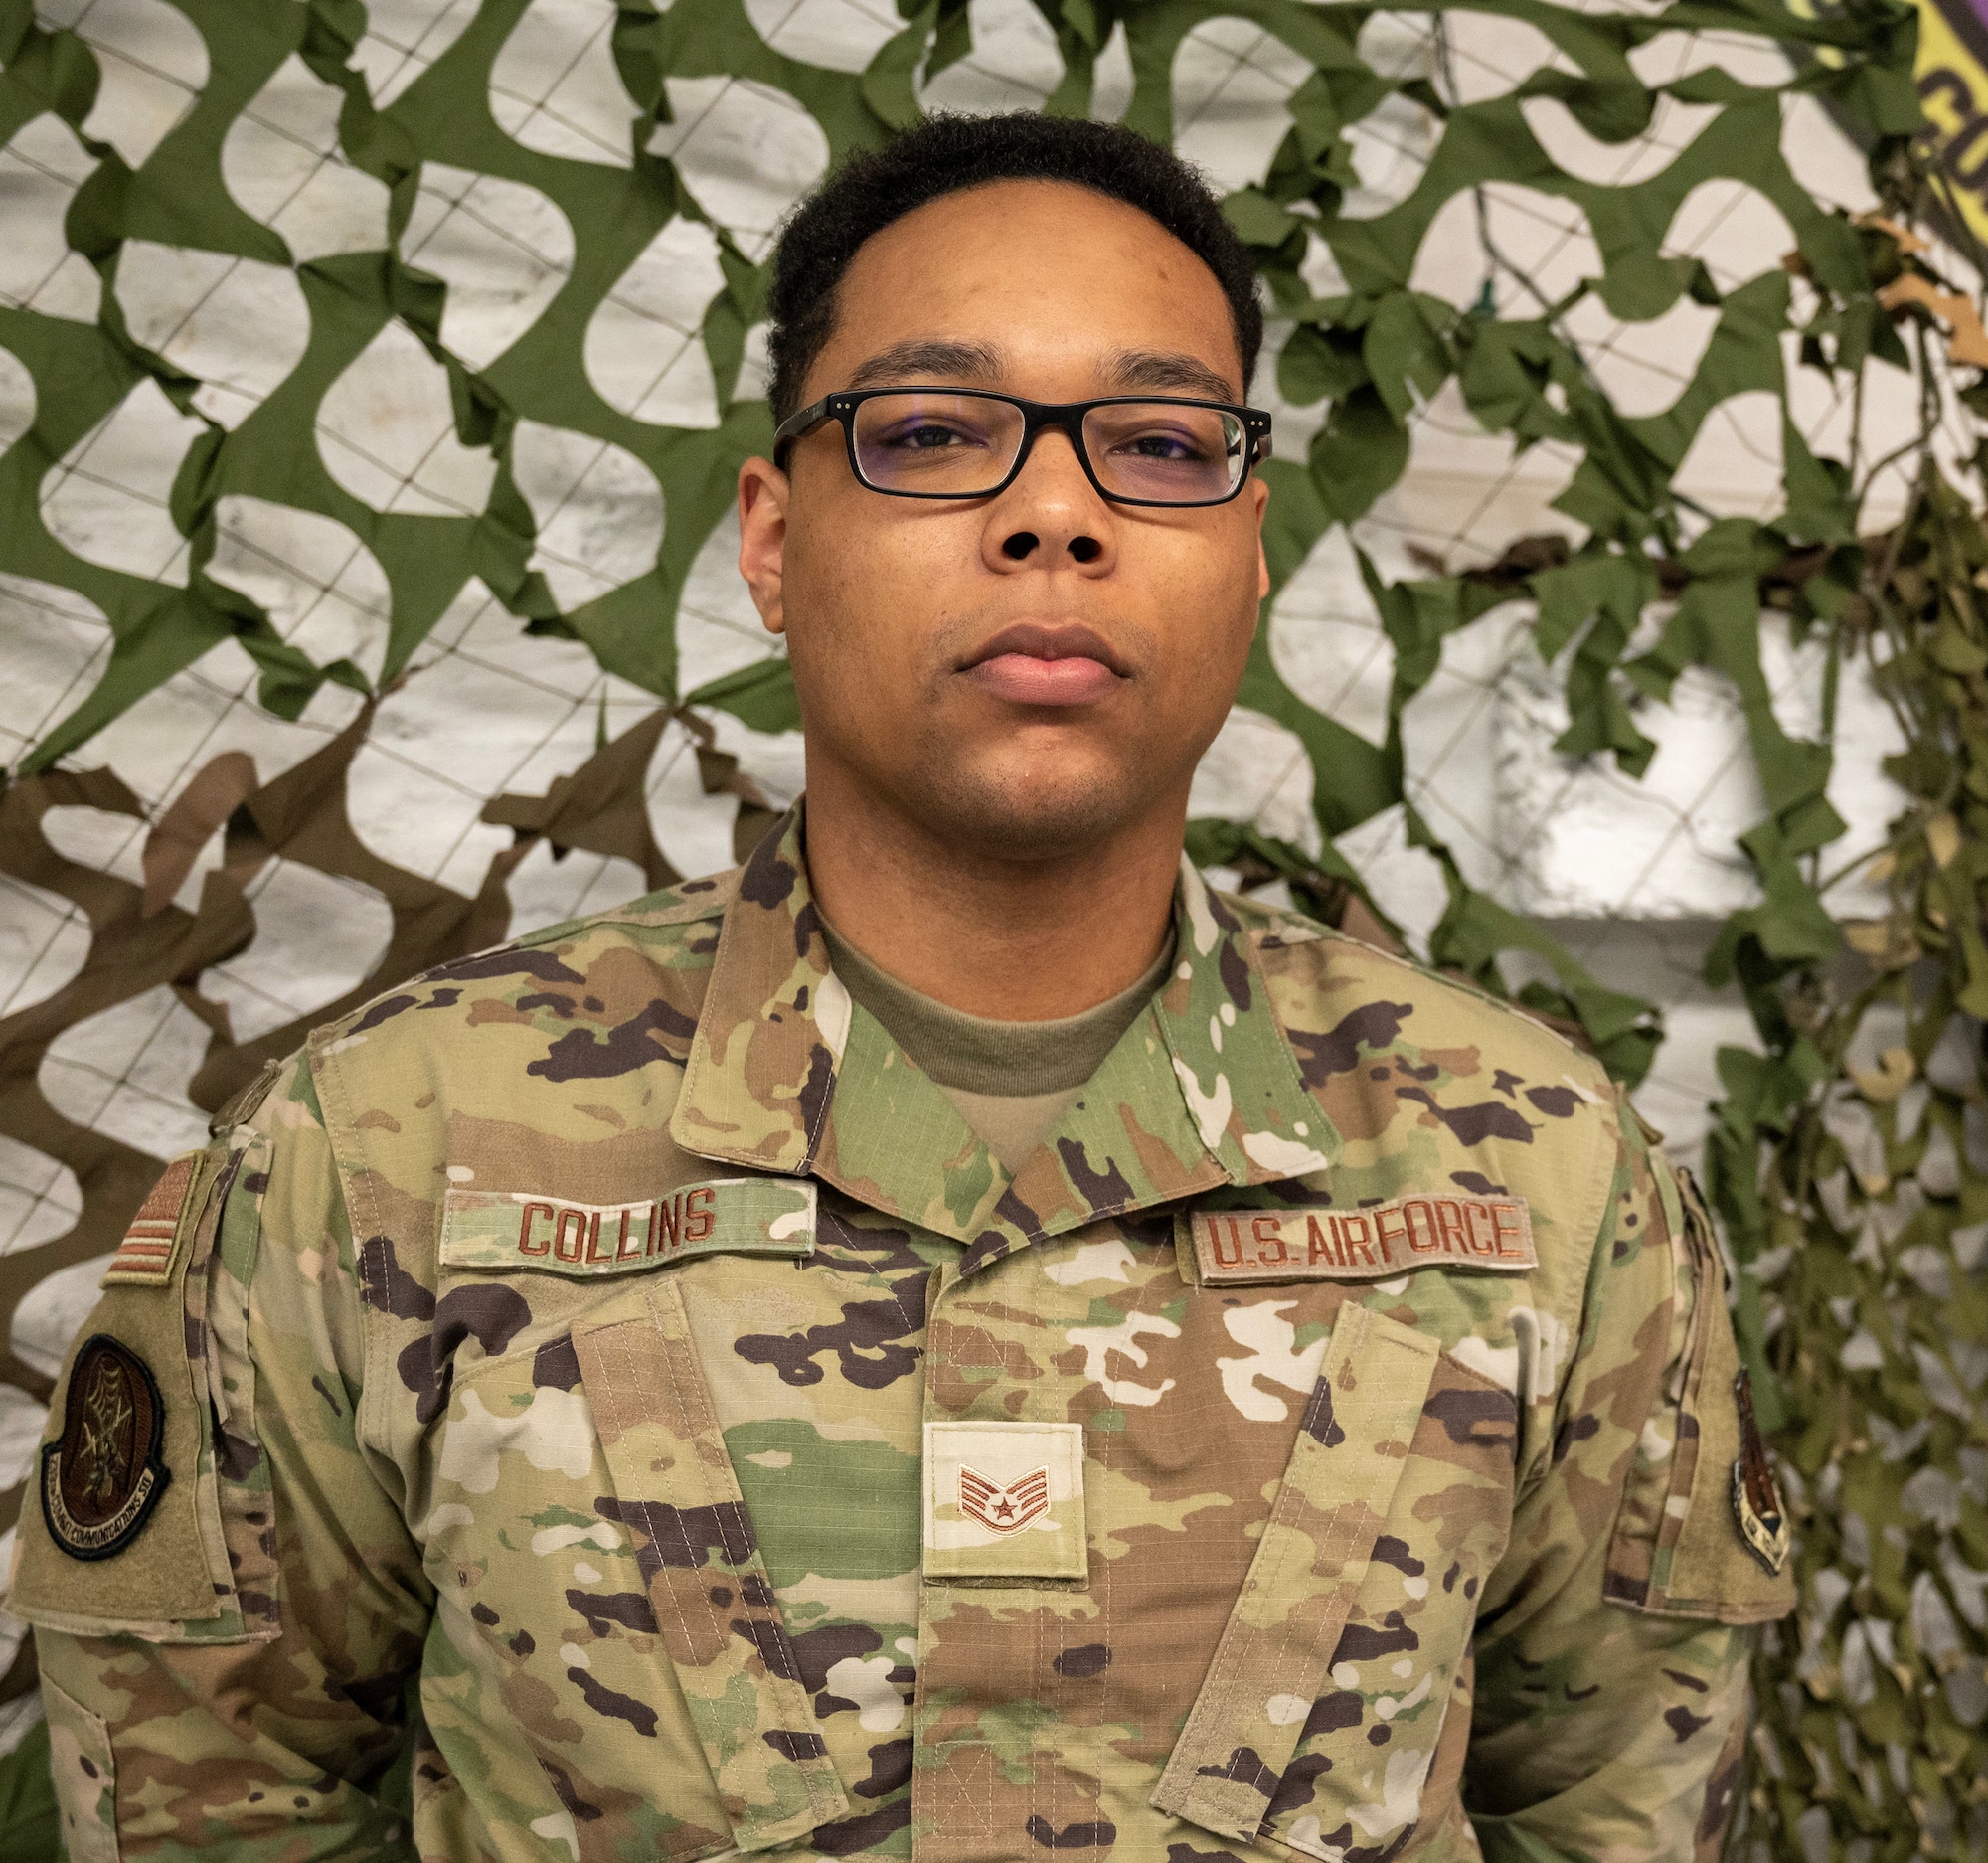 A U.S. Air Force Airman poses for a photo in front of a camoflague web netting background. He is wearing an OCP pattern uniform.